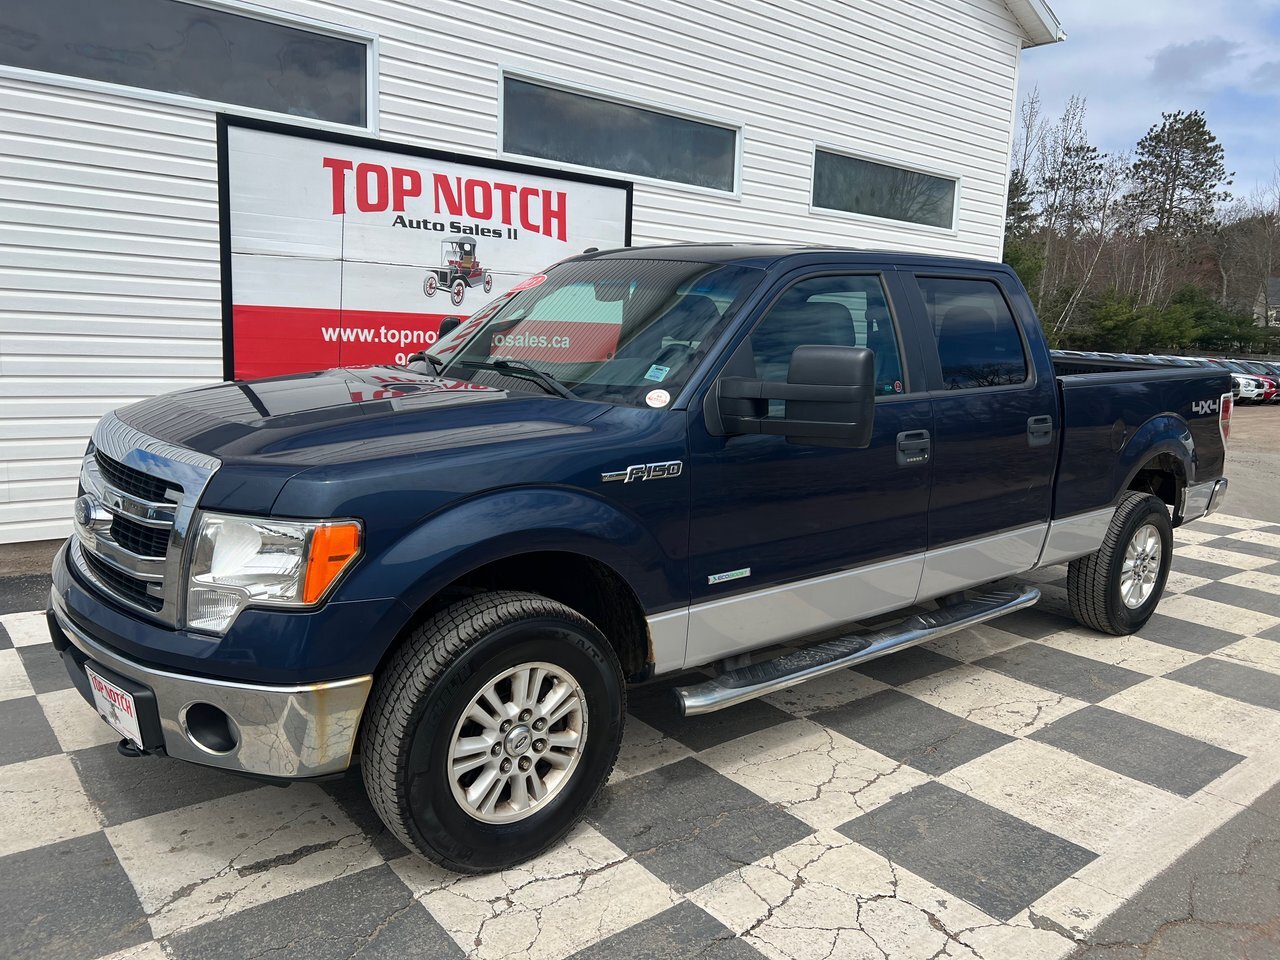 2013 Ford F-150 XLT - 4WD, Bed liner, Tow PKG, Supercrew cab, A.C